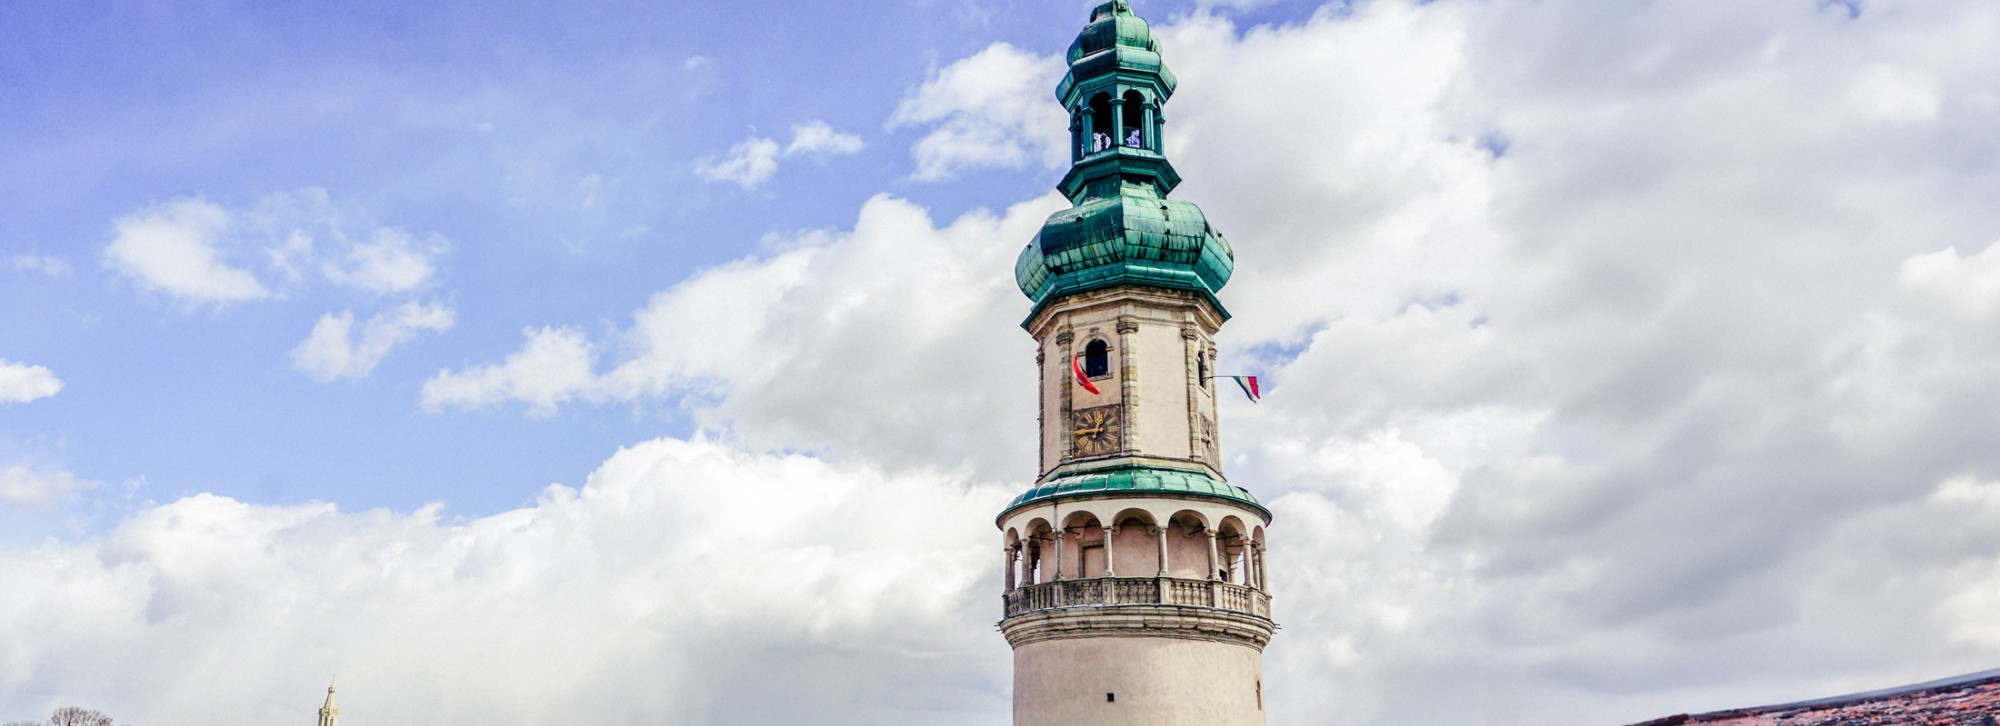 The symbol of Sopron, the Fire Tower